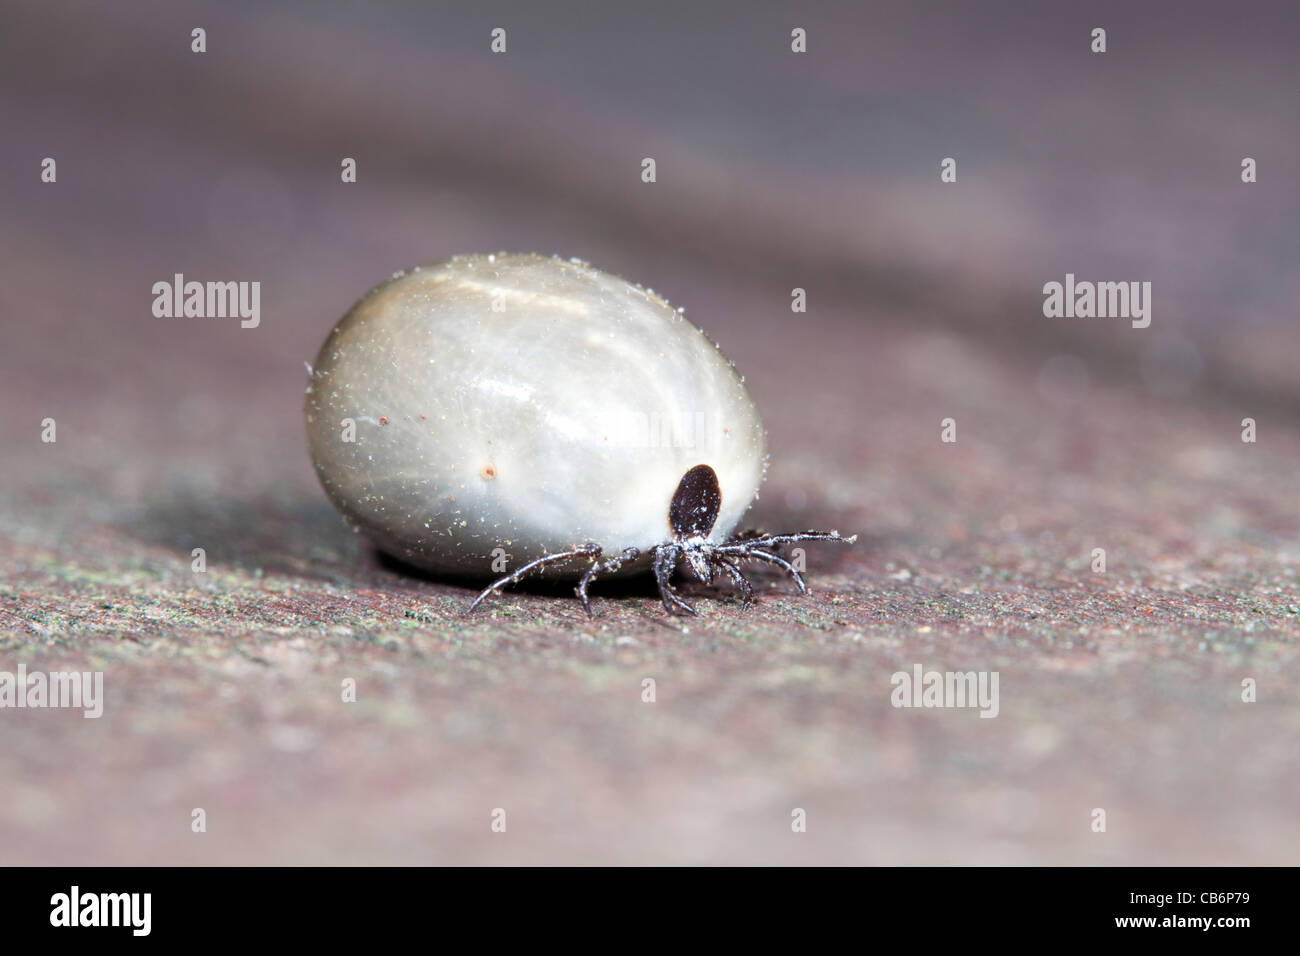 Tick (Ixodeus ricinus), mature insect gourged with blood, Lower Saxony, Germany Stock Photo